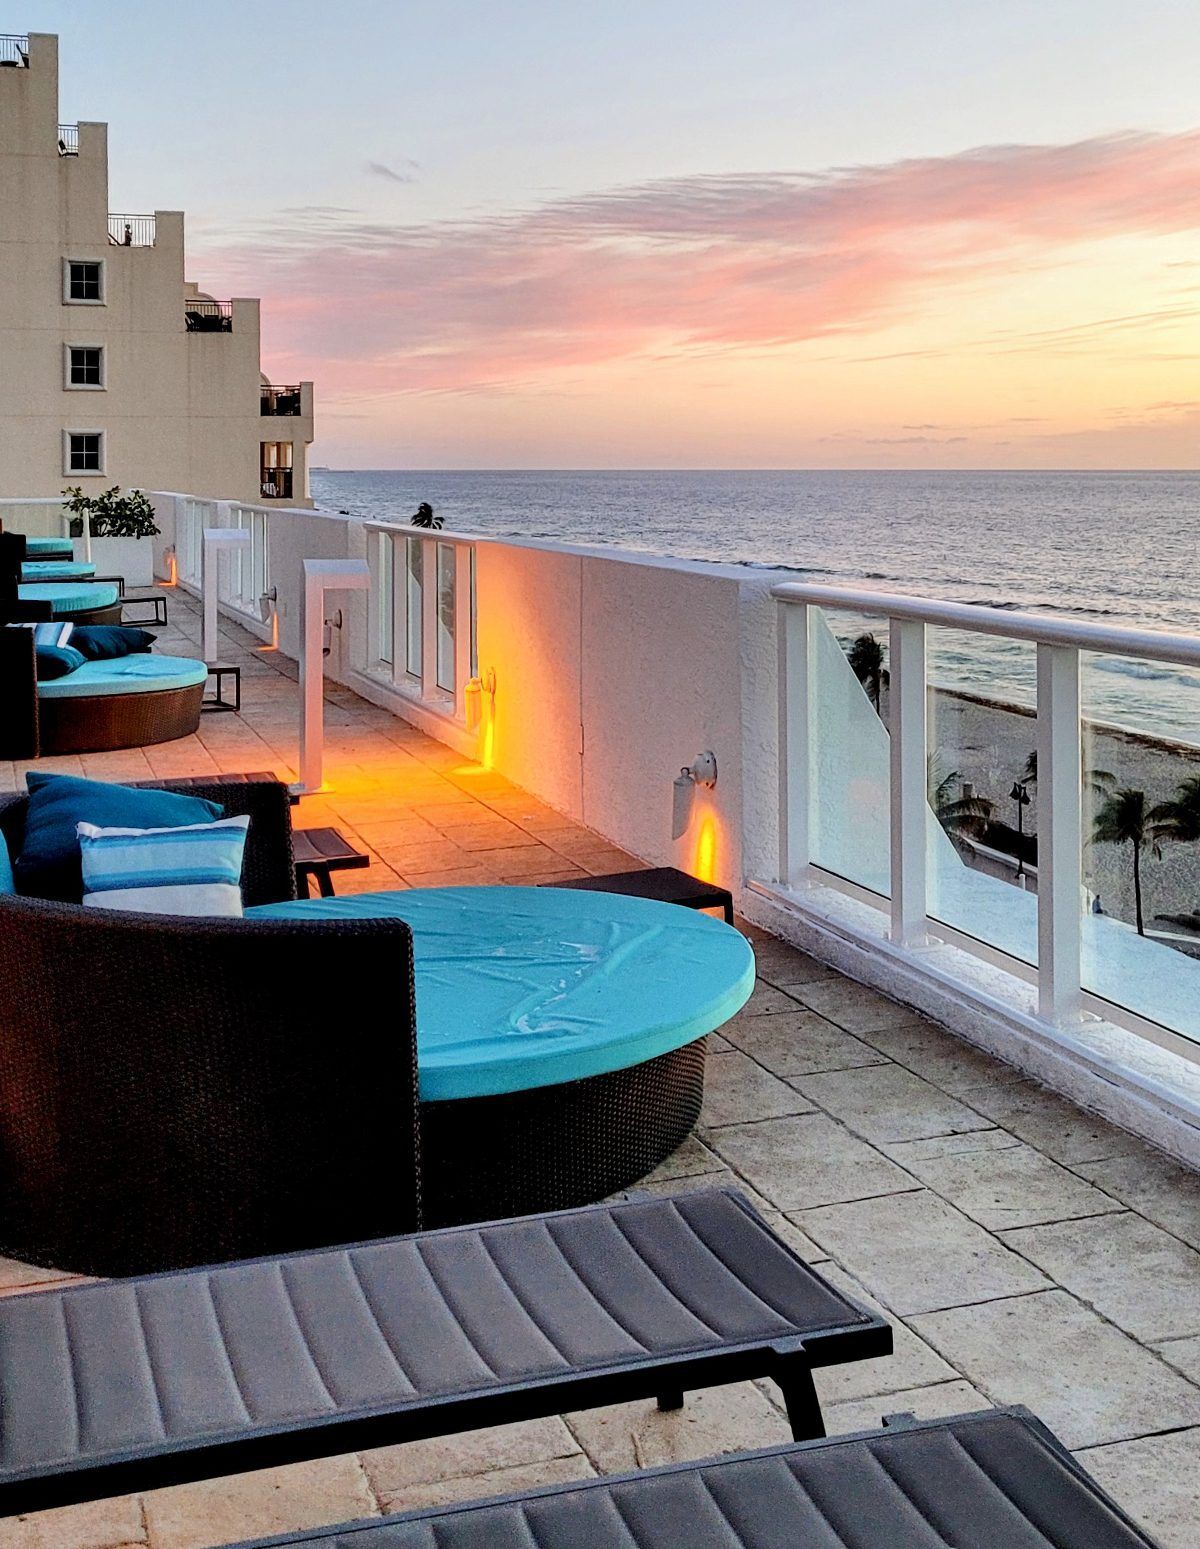 The pool deck of Conrad Hotel in Fort Lauderdale, Florida, offers a relaxing ambiance with circular daybeds lining the exterior glass partition. Guests can unwind and enjoy the picturesque view of the ocean and sandy beaches